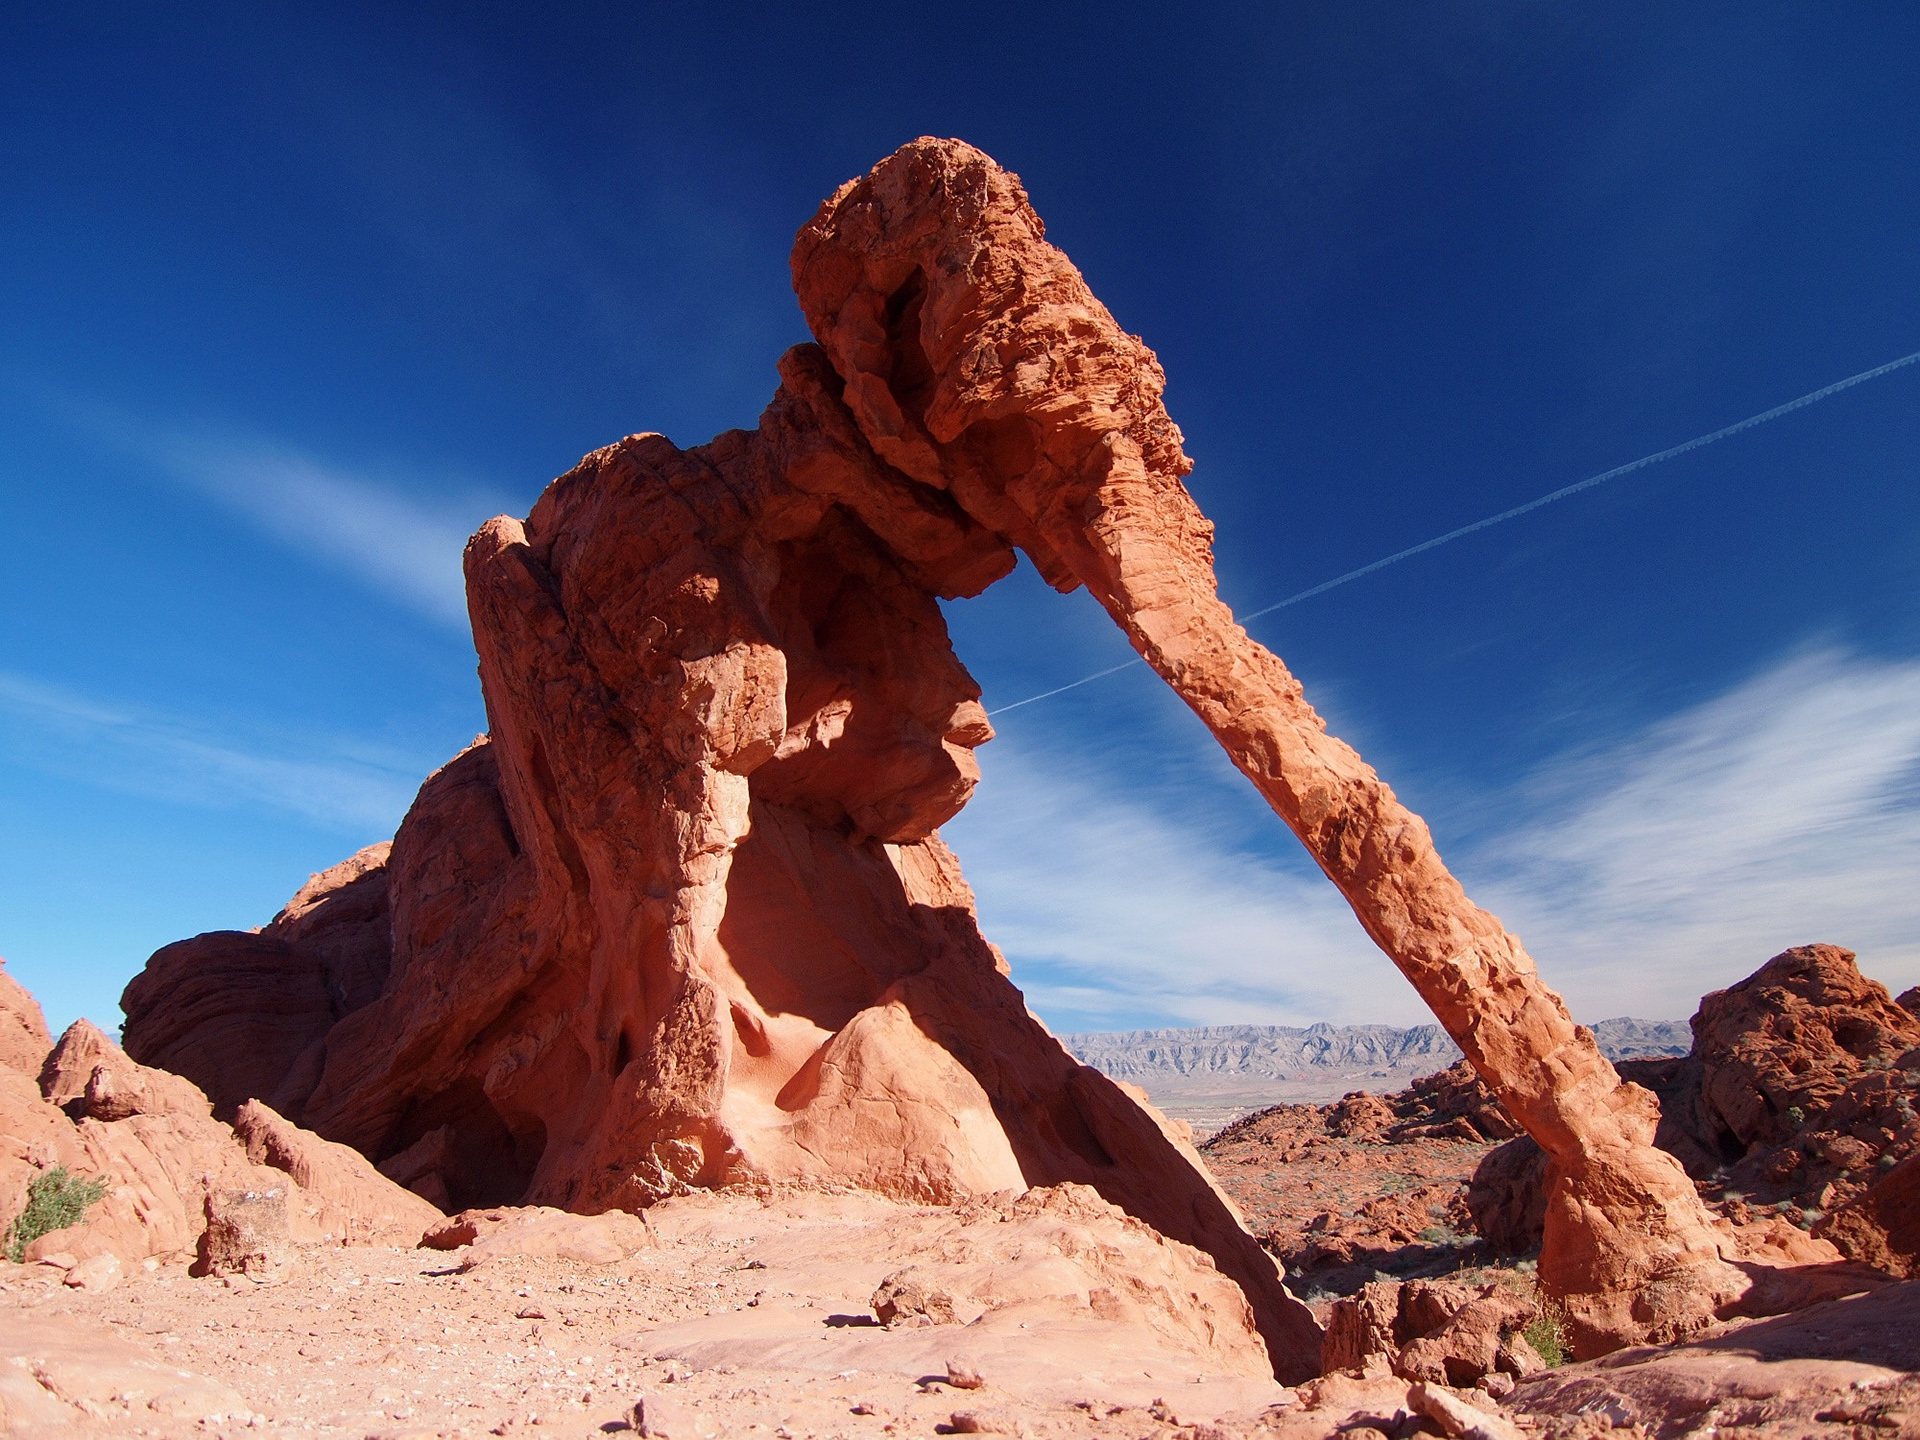 The Elephant Rock in the Valley of Fire State Park